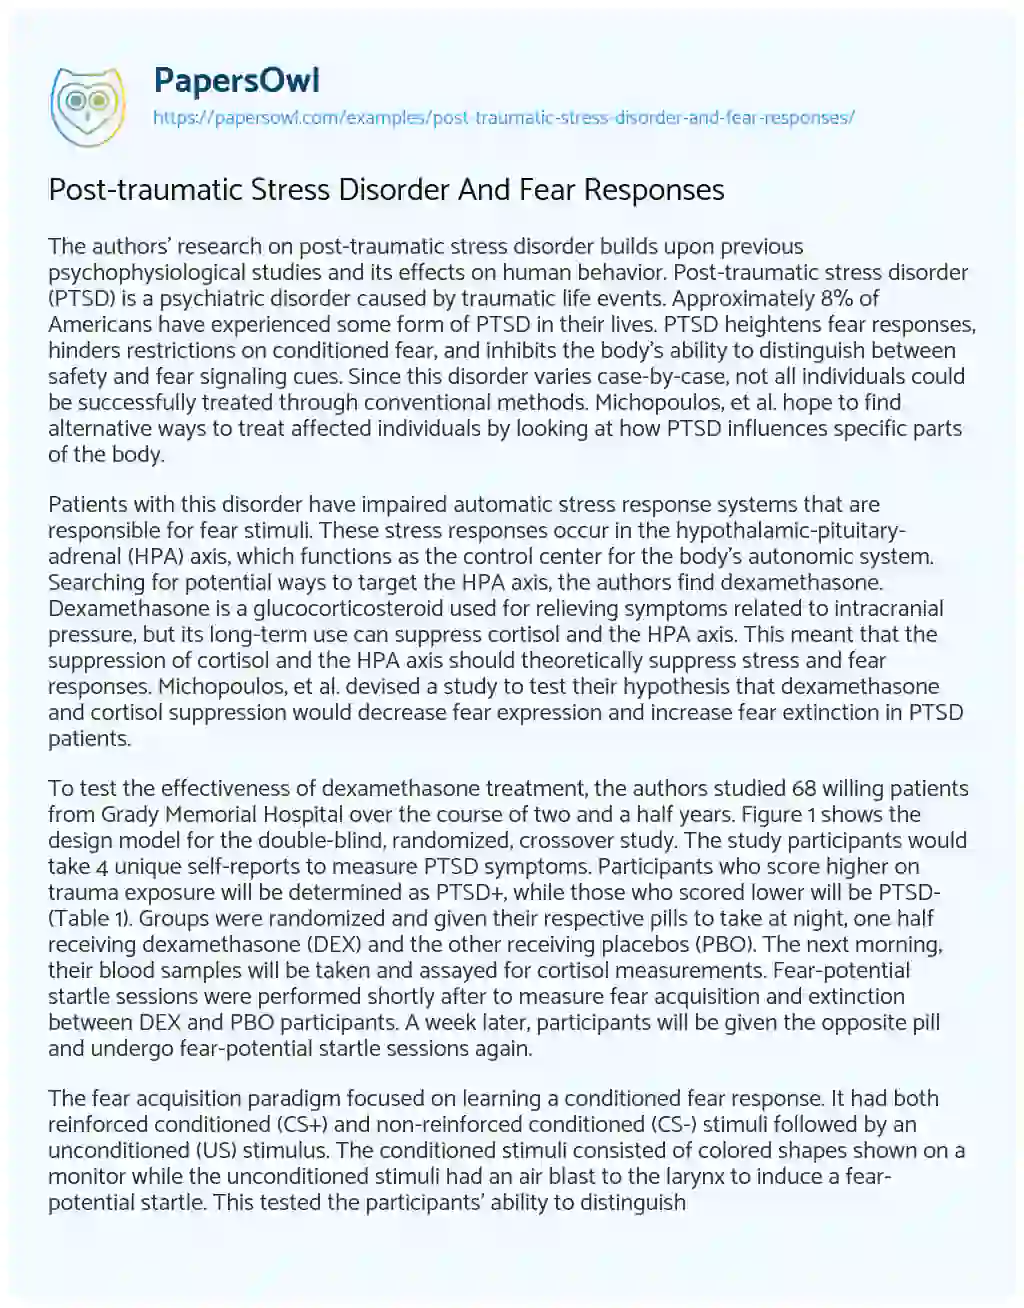 Post-traumatic Stress Disorder and Fear Responses essay